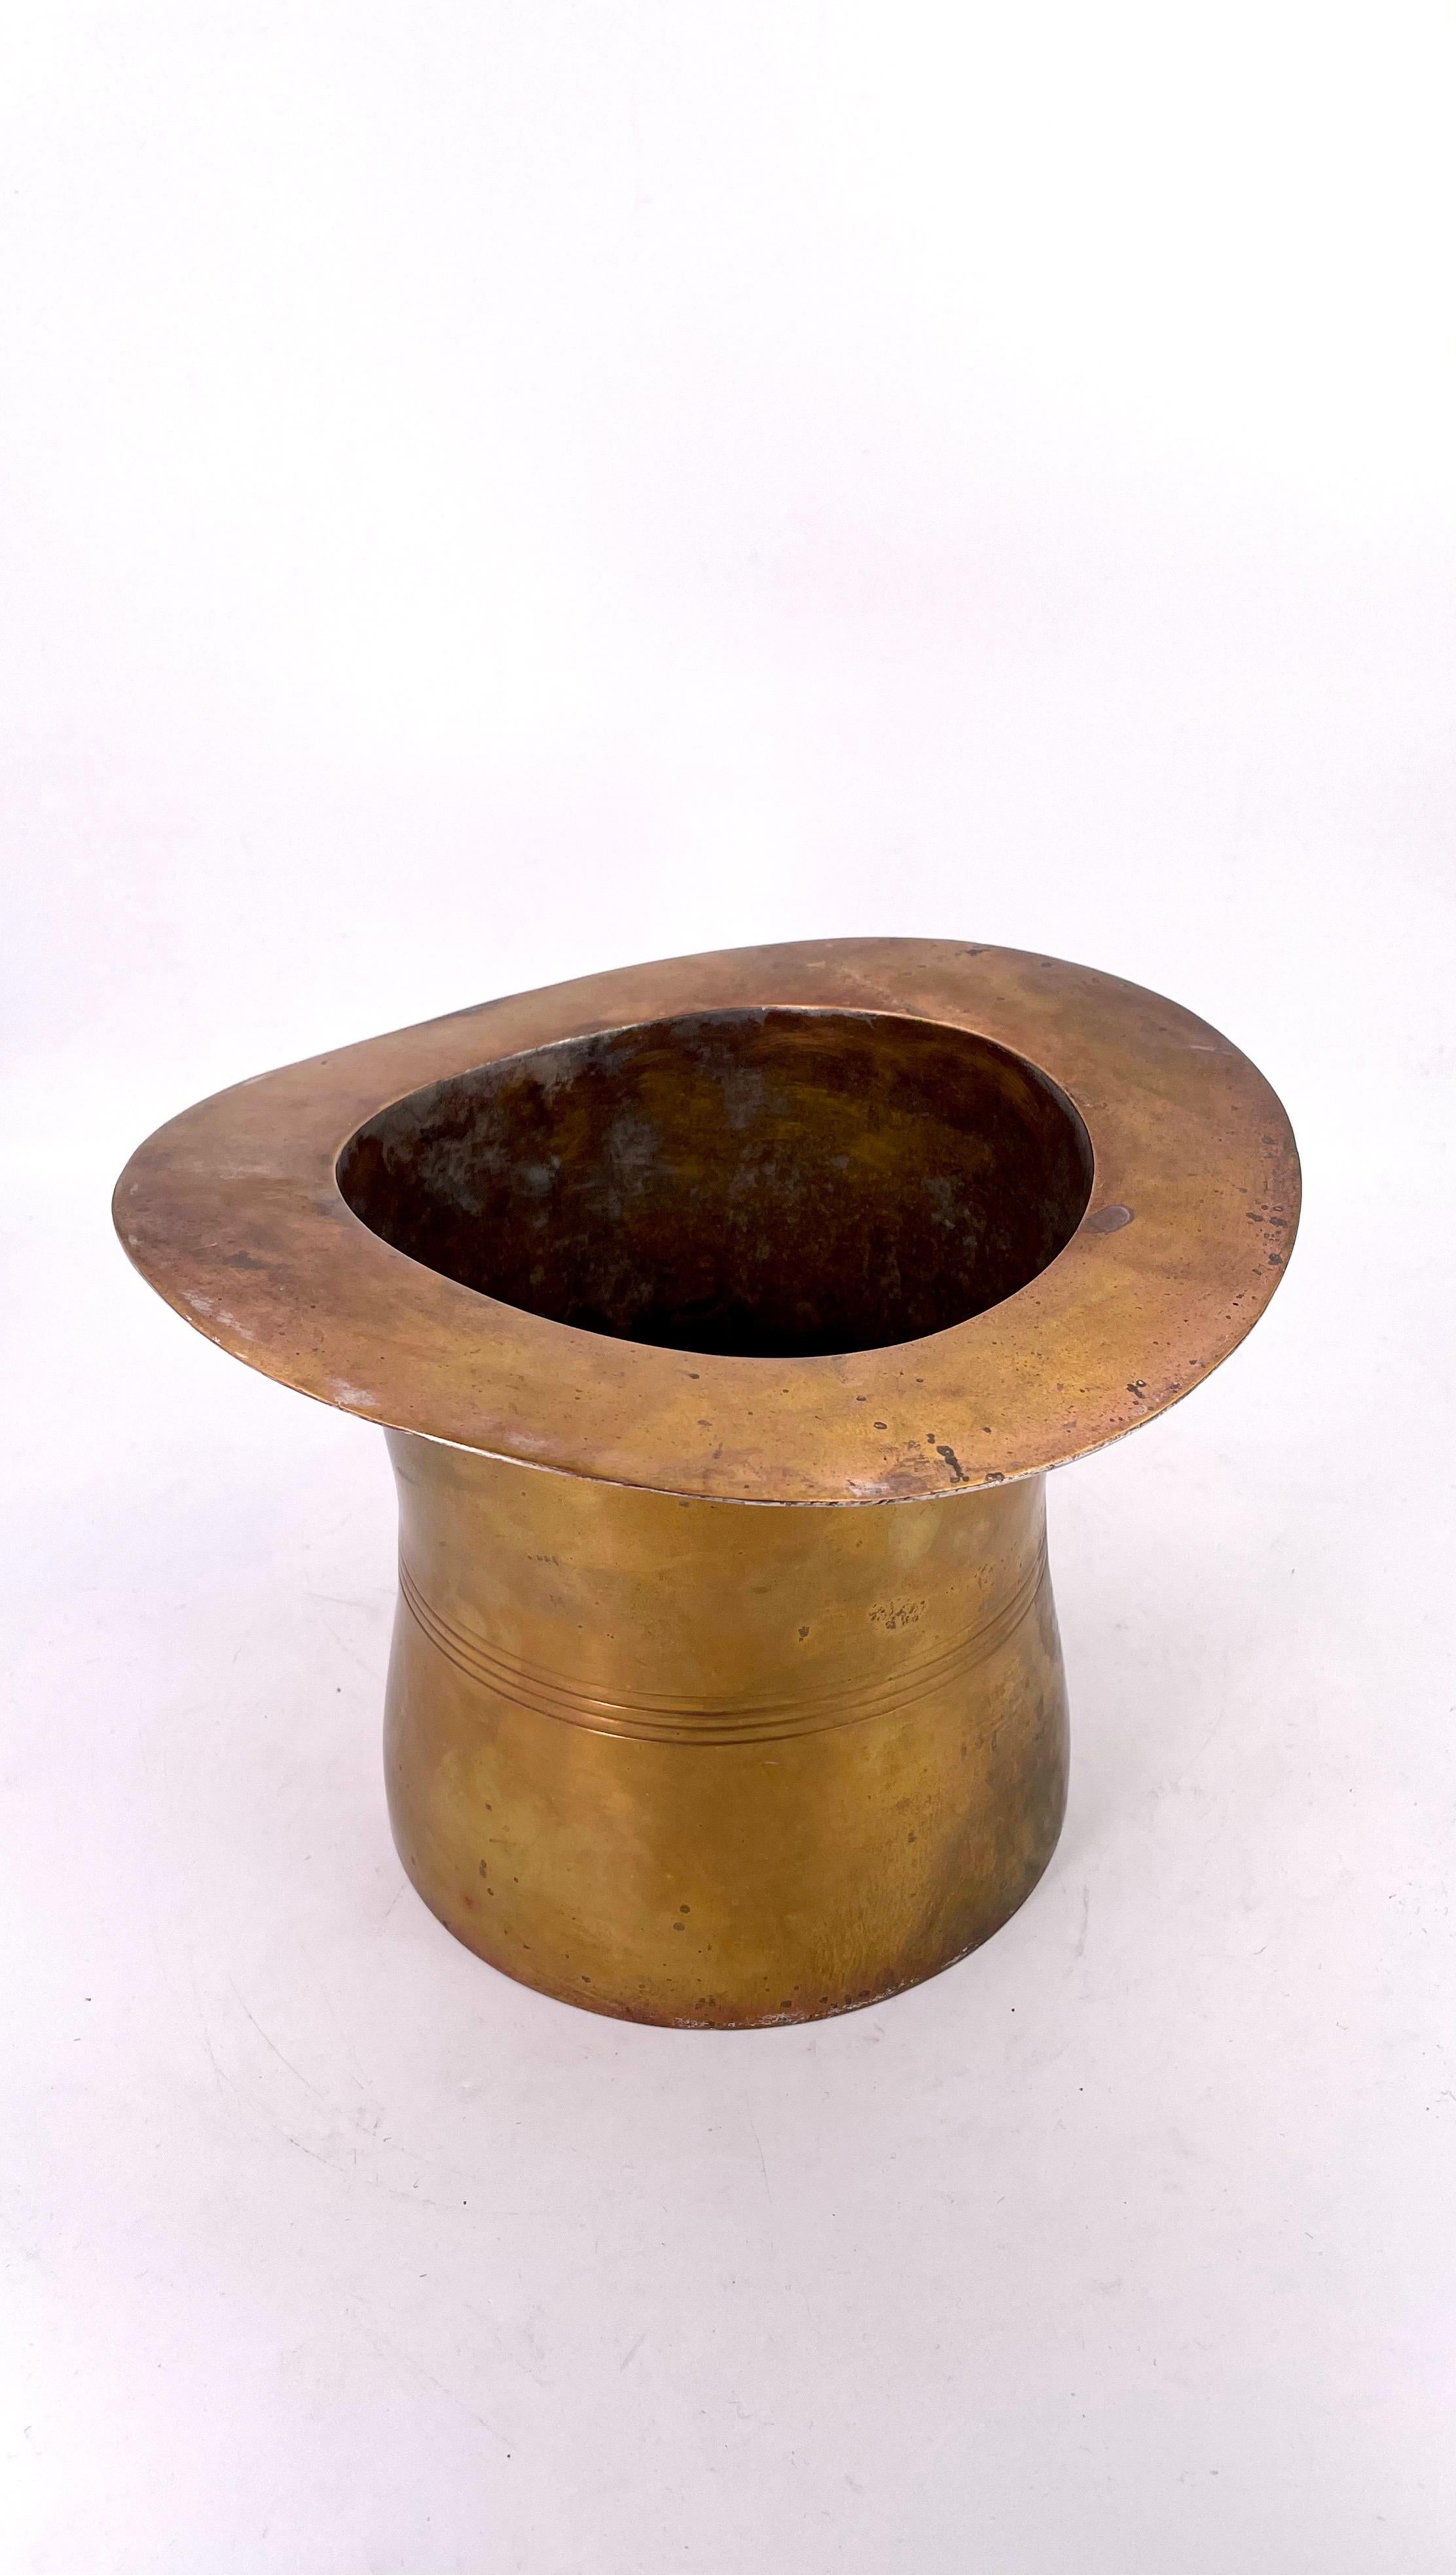 Cool and unique patinated brass over nickel steel, top hat like the one of the Monopoly game, circa 1970s.